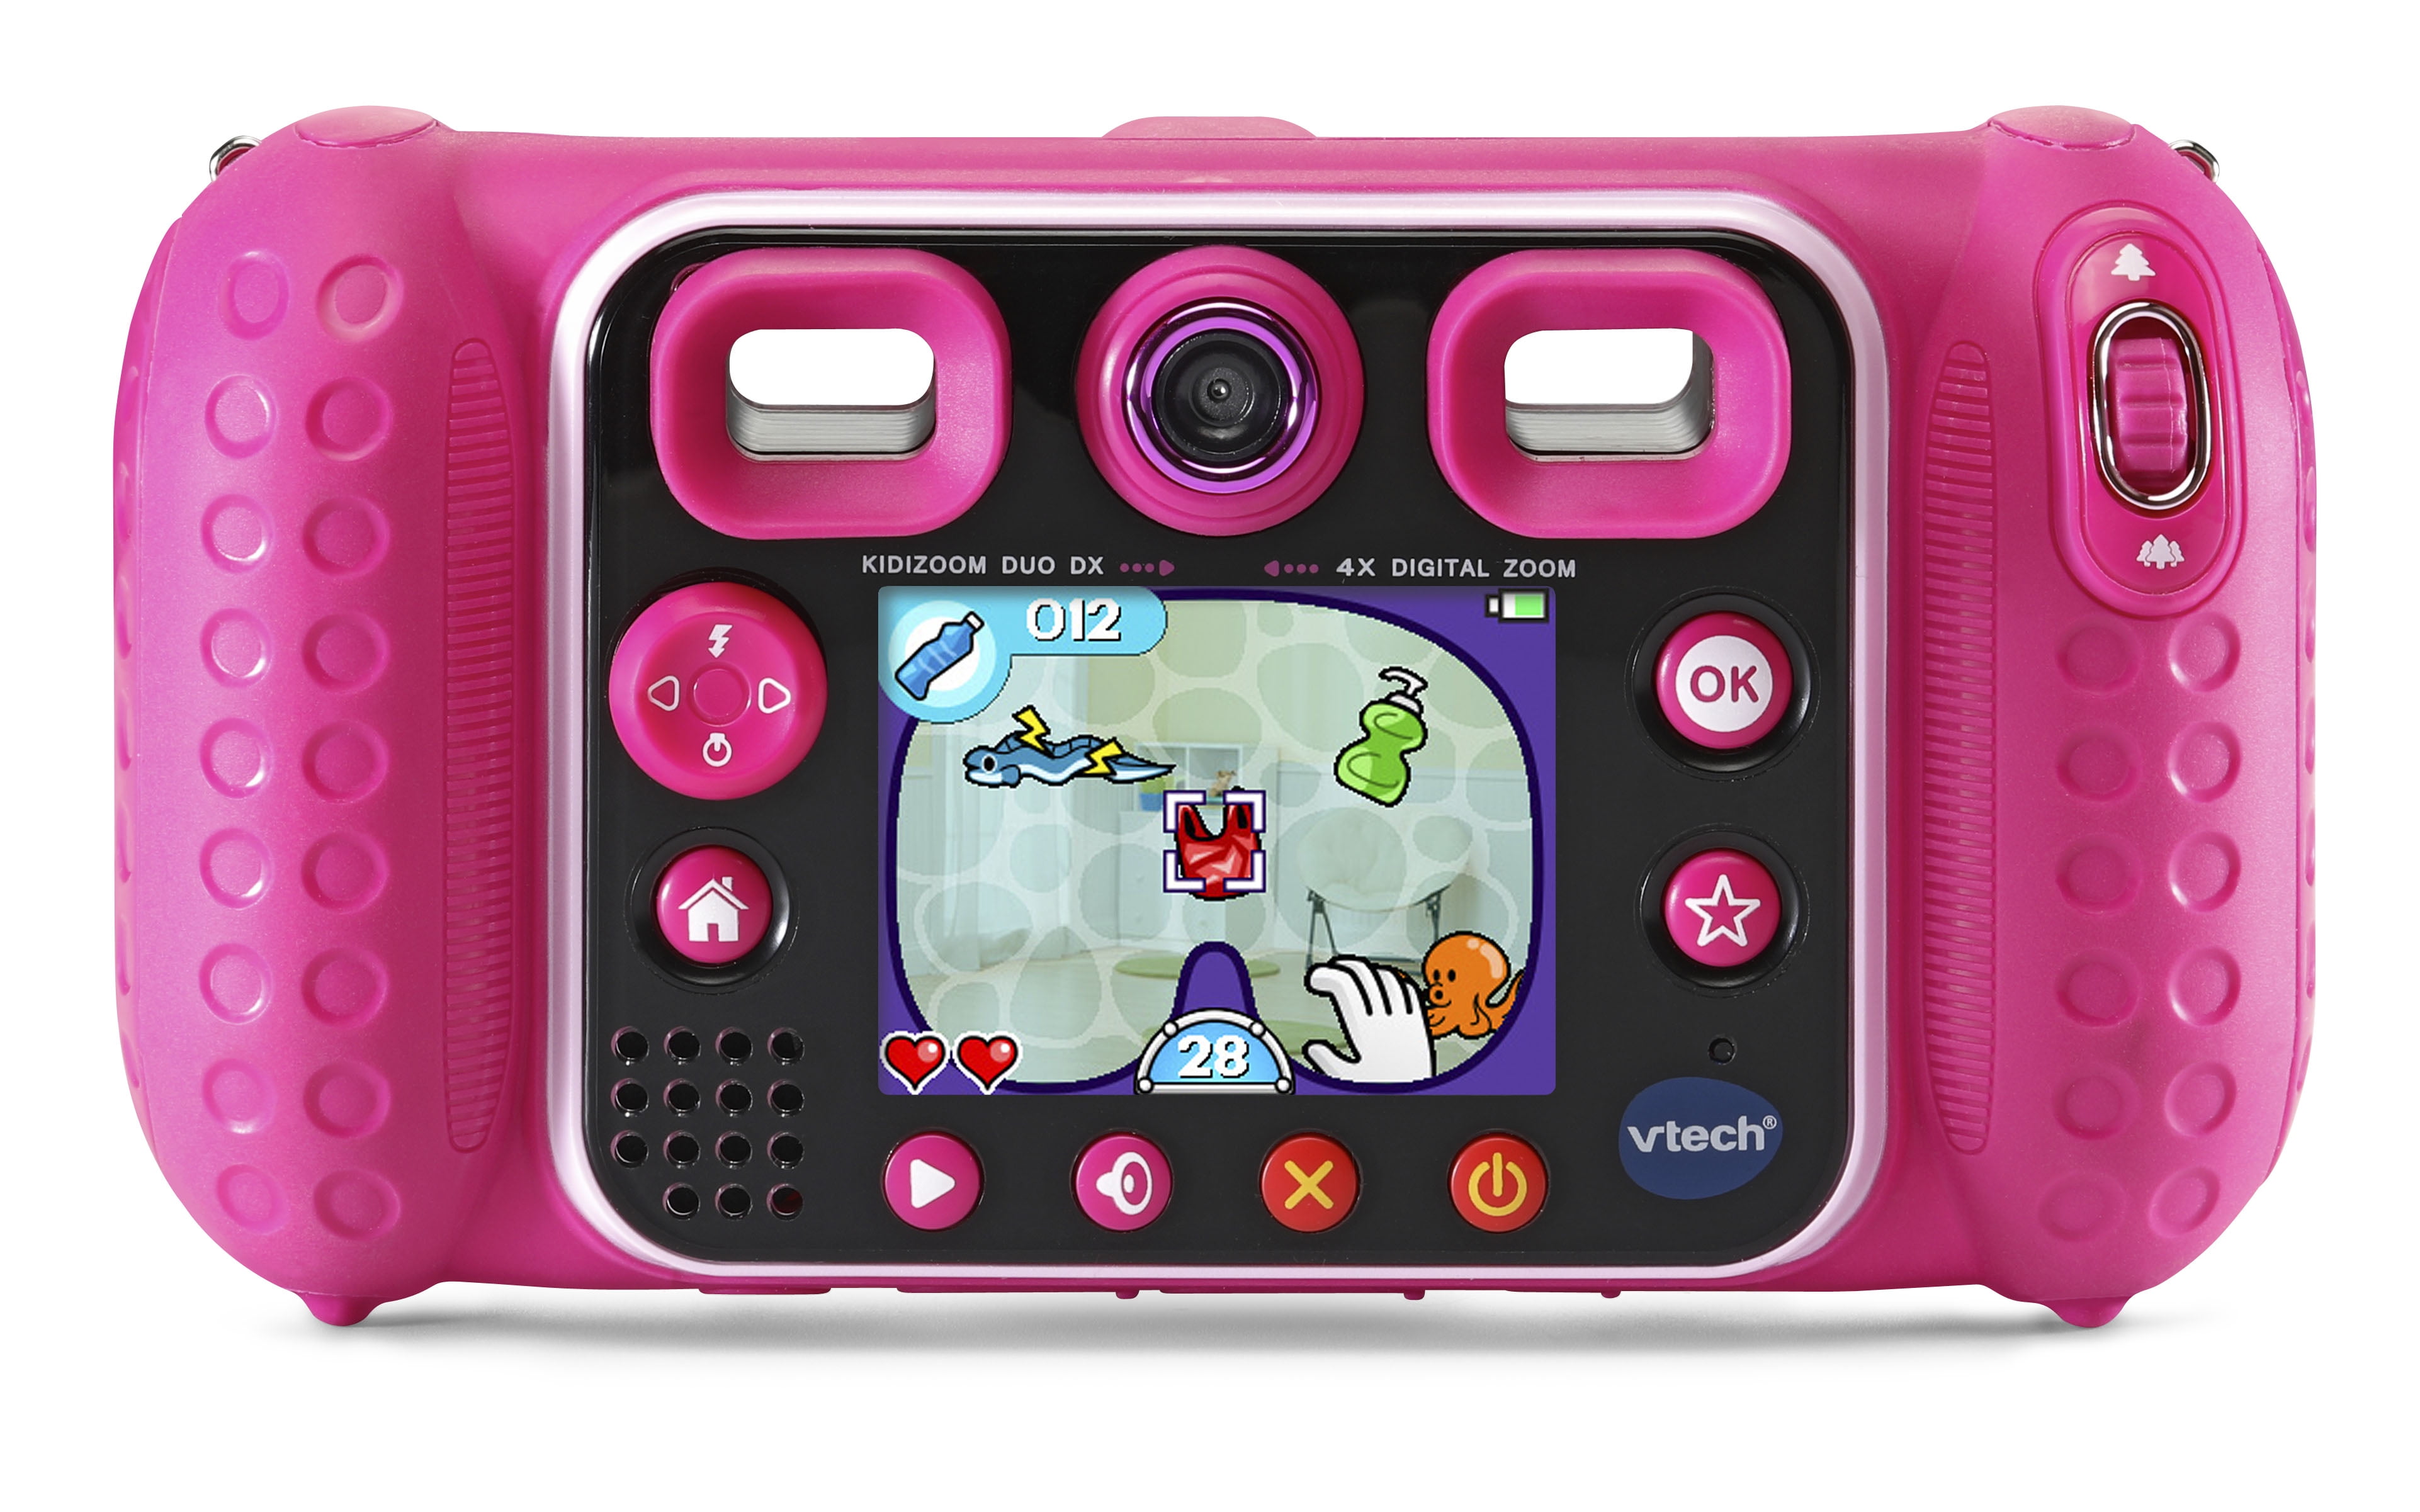 VTech KidiZoom Duo DX Digital Selfie Camera with MP3 Player, Pink 